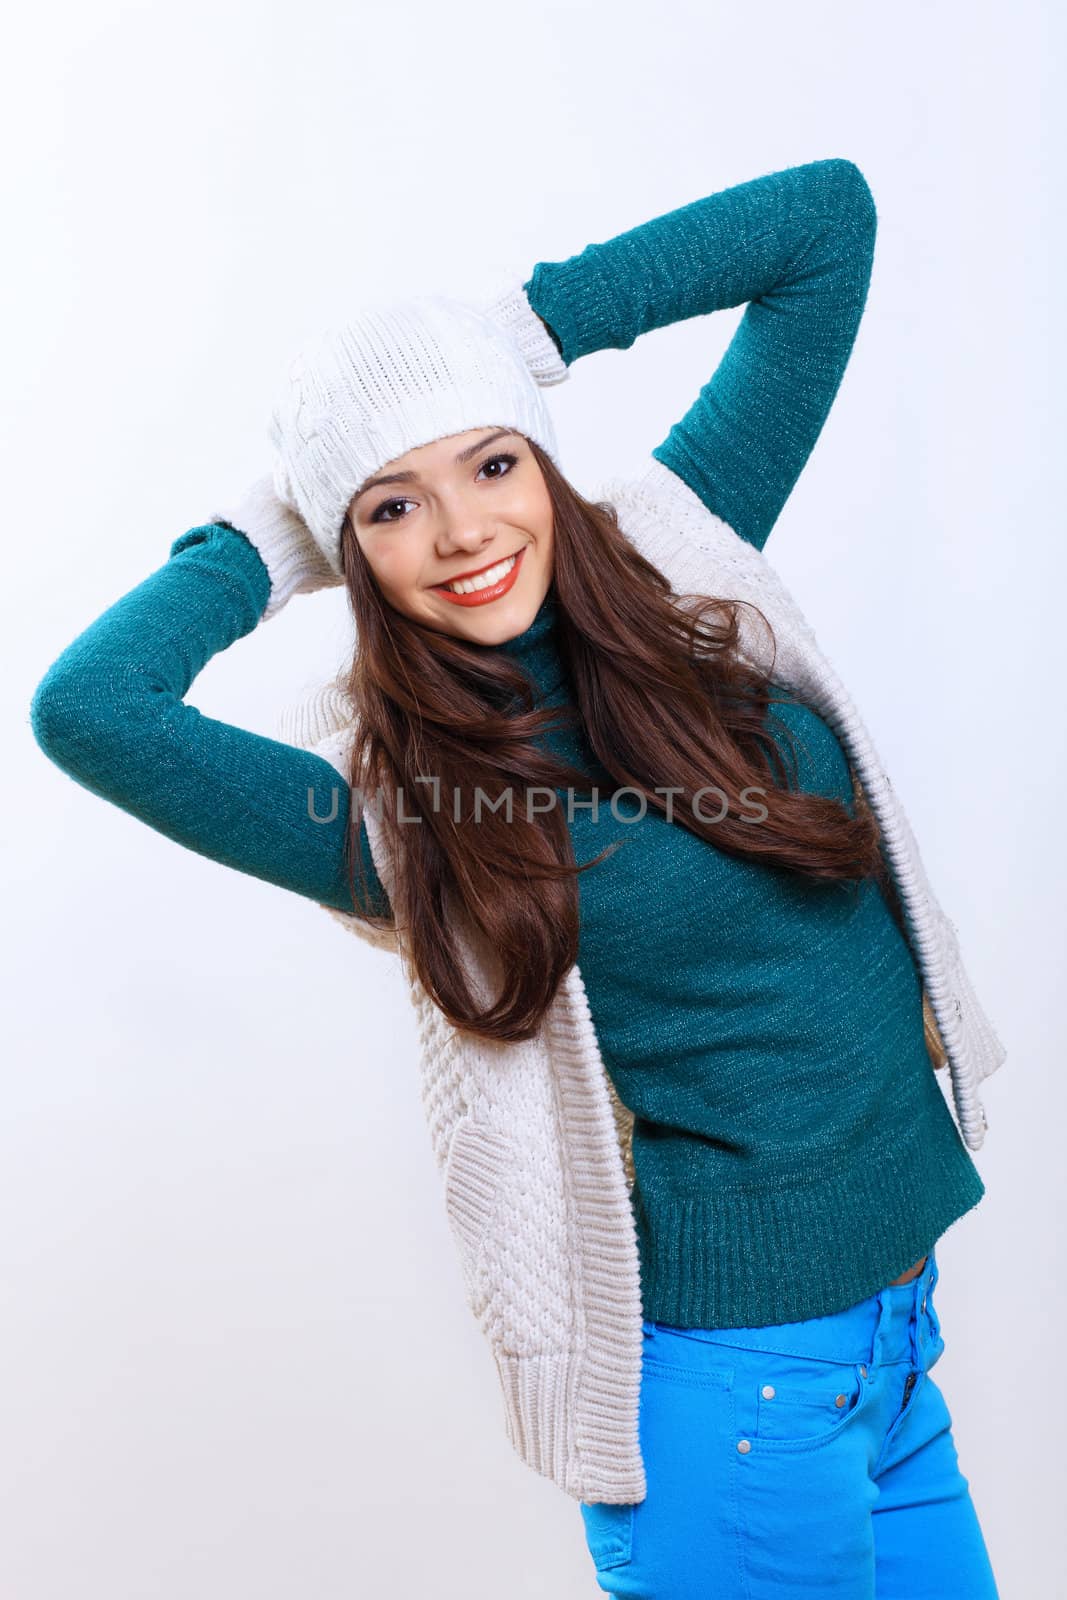 Young pretty woman with long hair wearing warm pullover